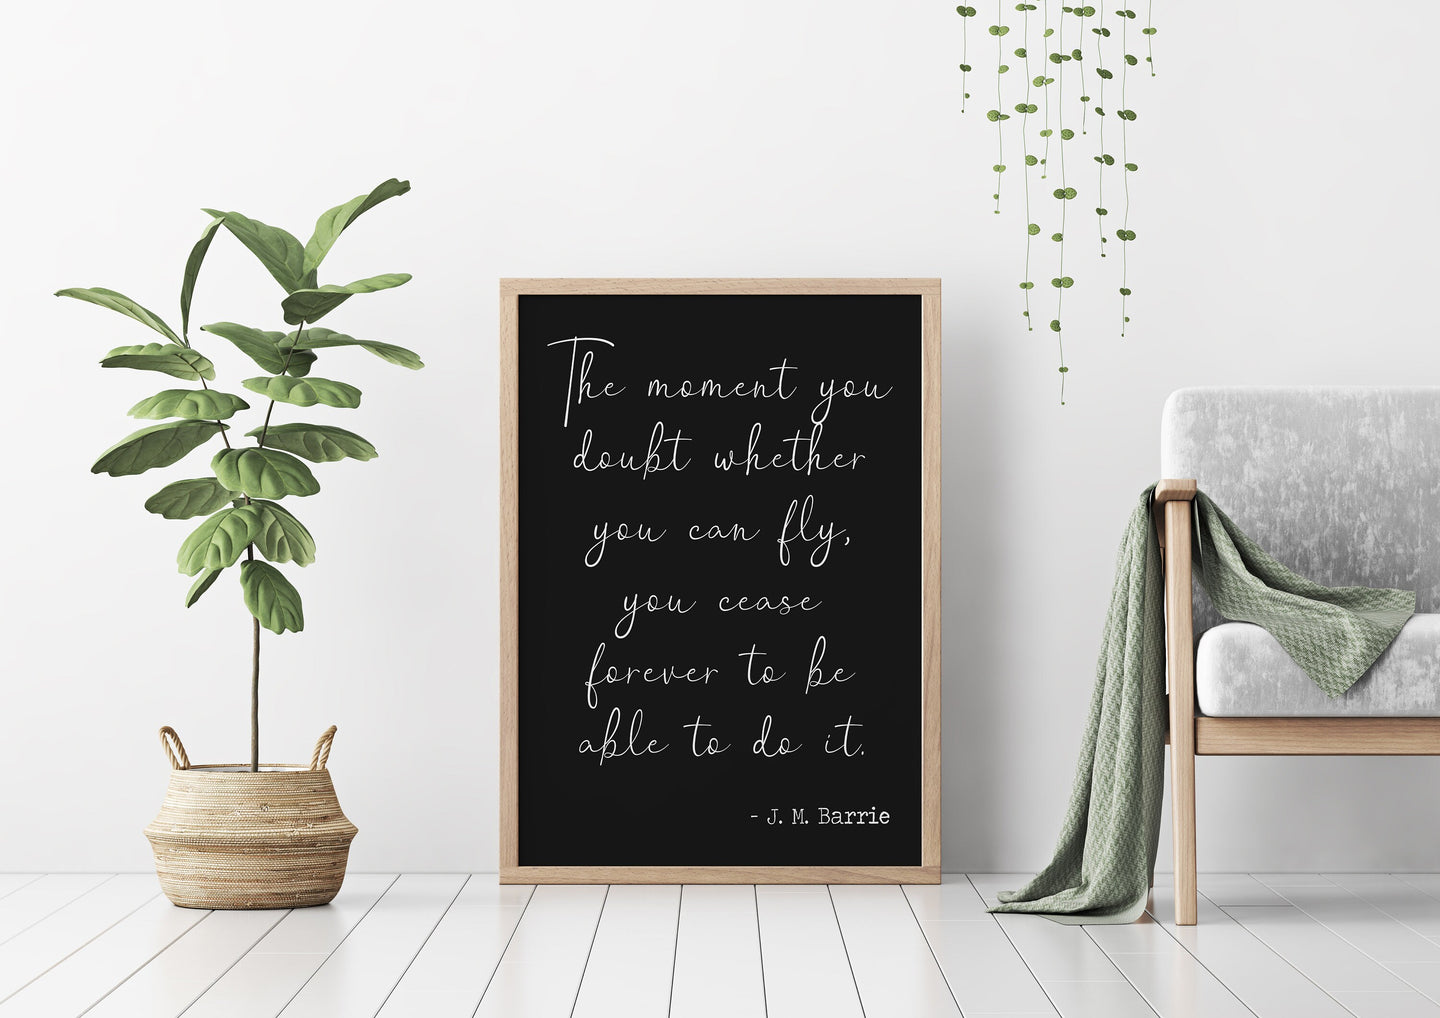 Peter Pan Quote - The moment you doubt whether you can fly you cease forever to be able to do it - Little girl's Bedroom decor UNFRAMED